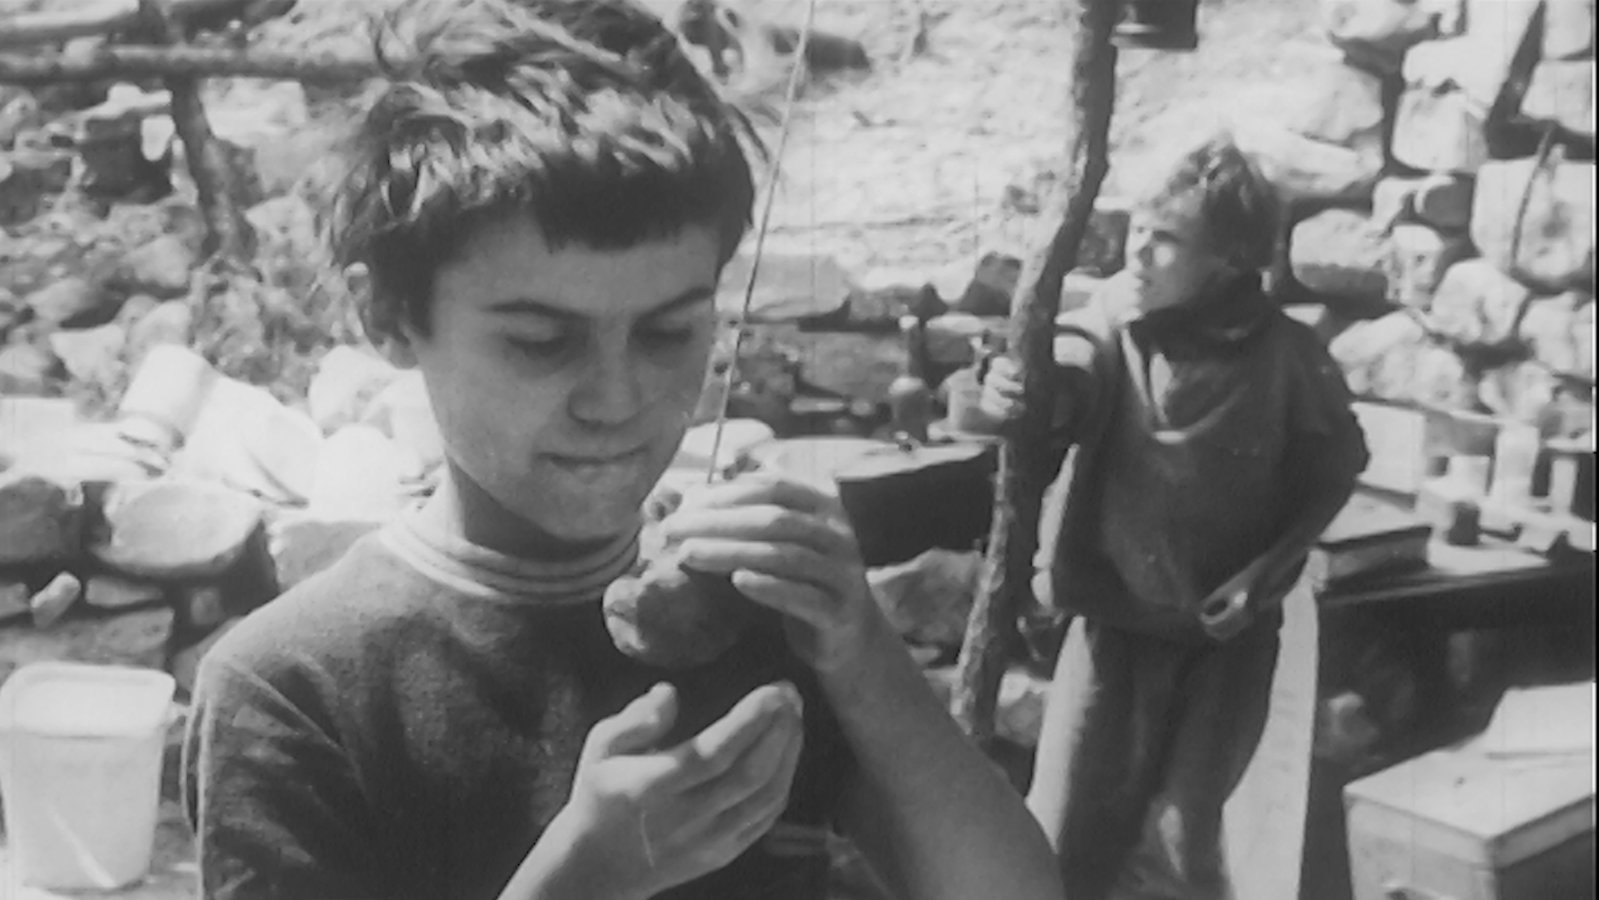 a black and white image of a young boy standing outside cupping an object in his hands, while another boy behind him clutches a wooden post